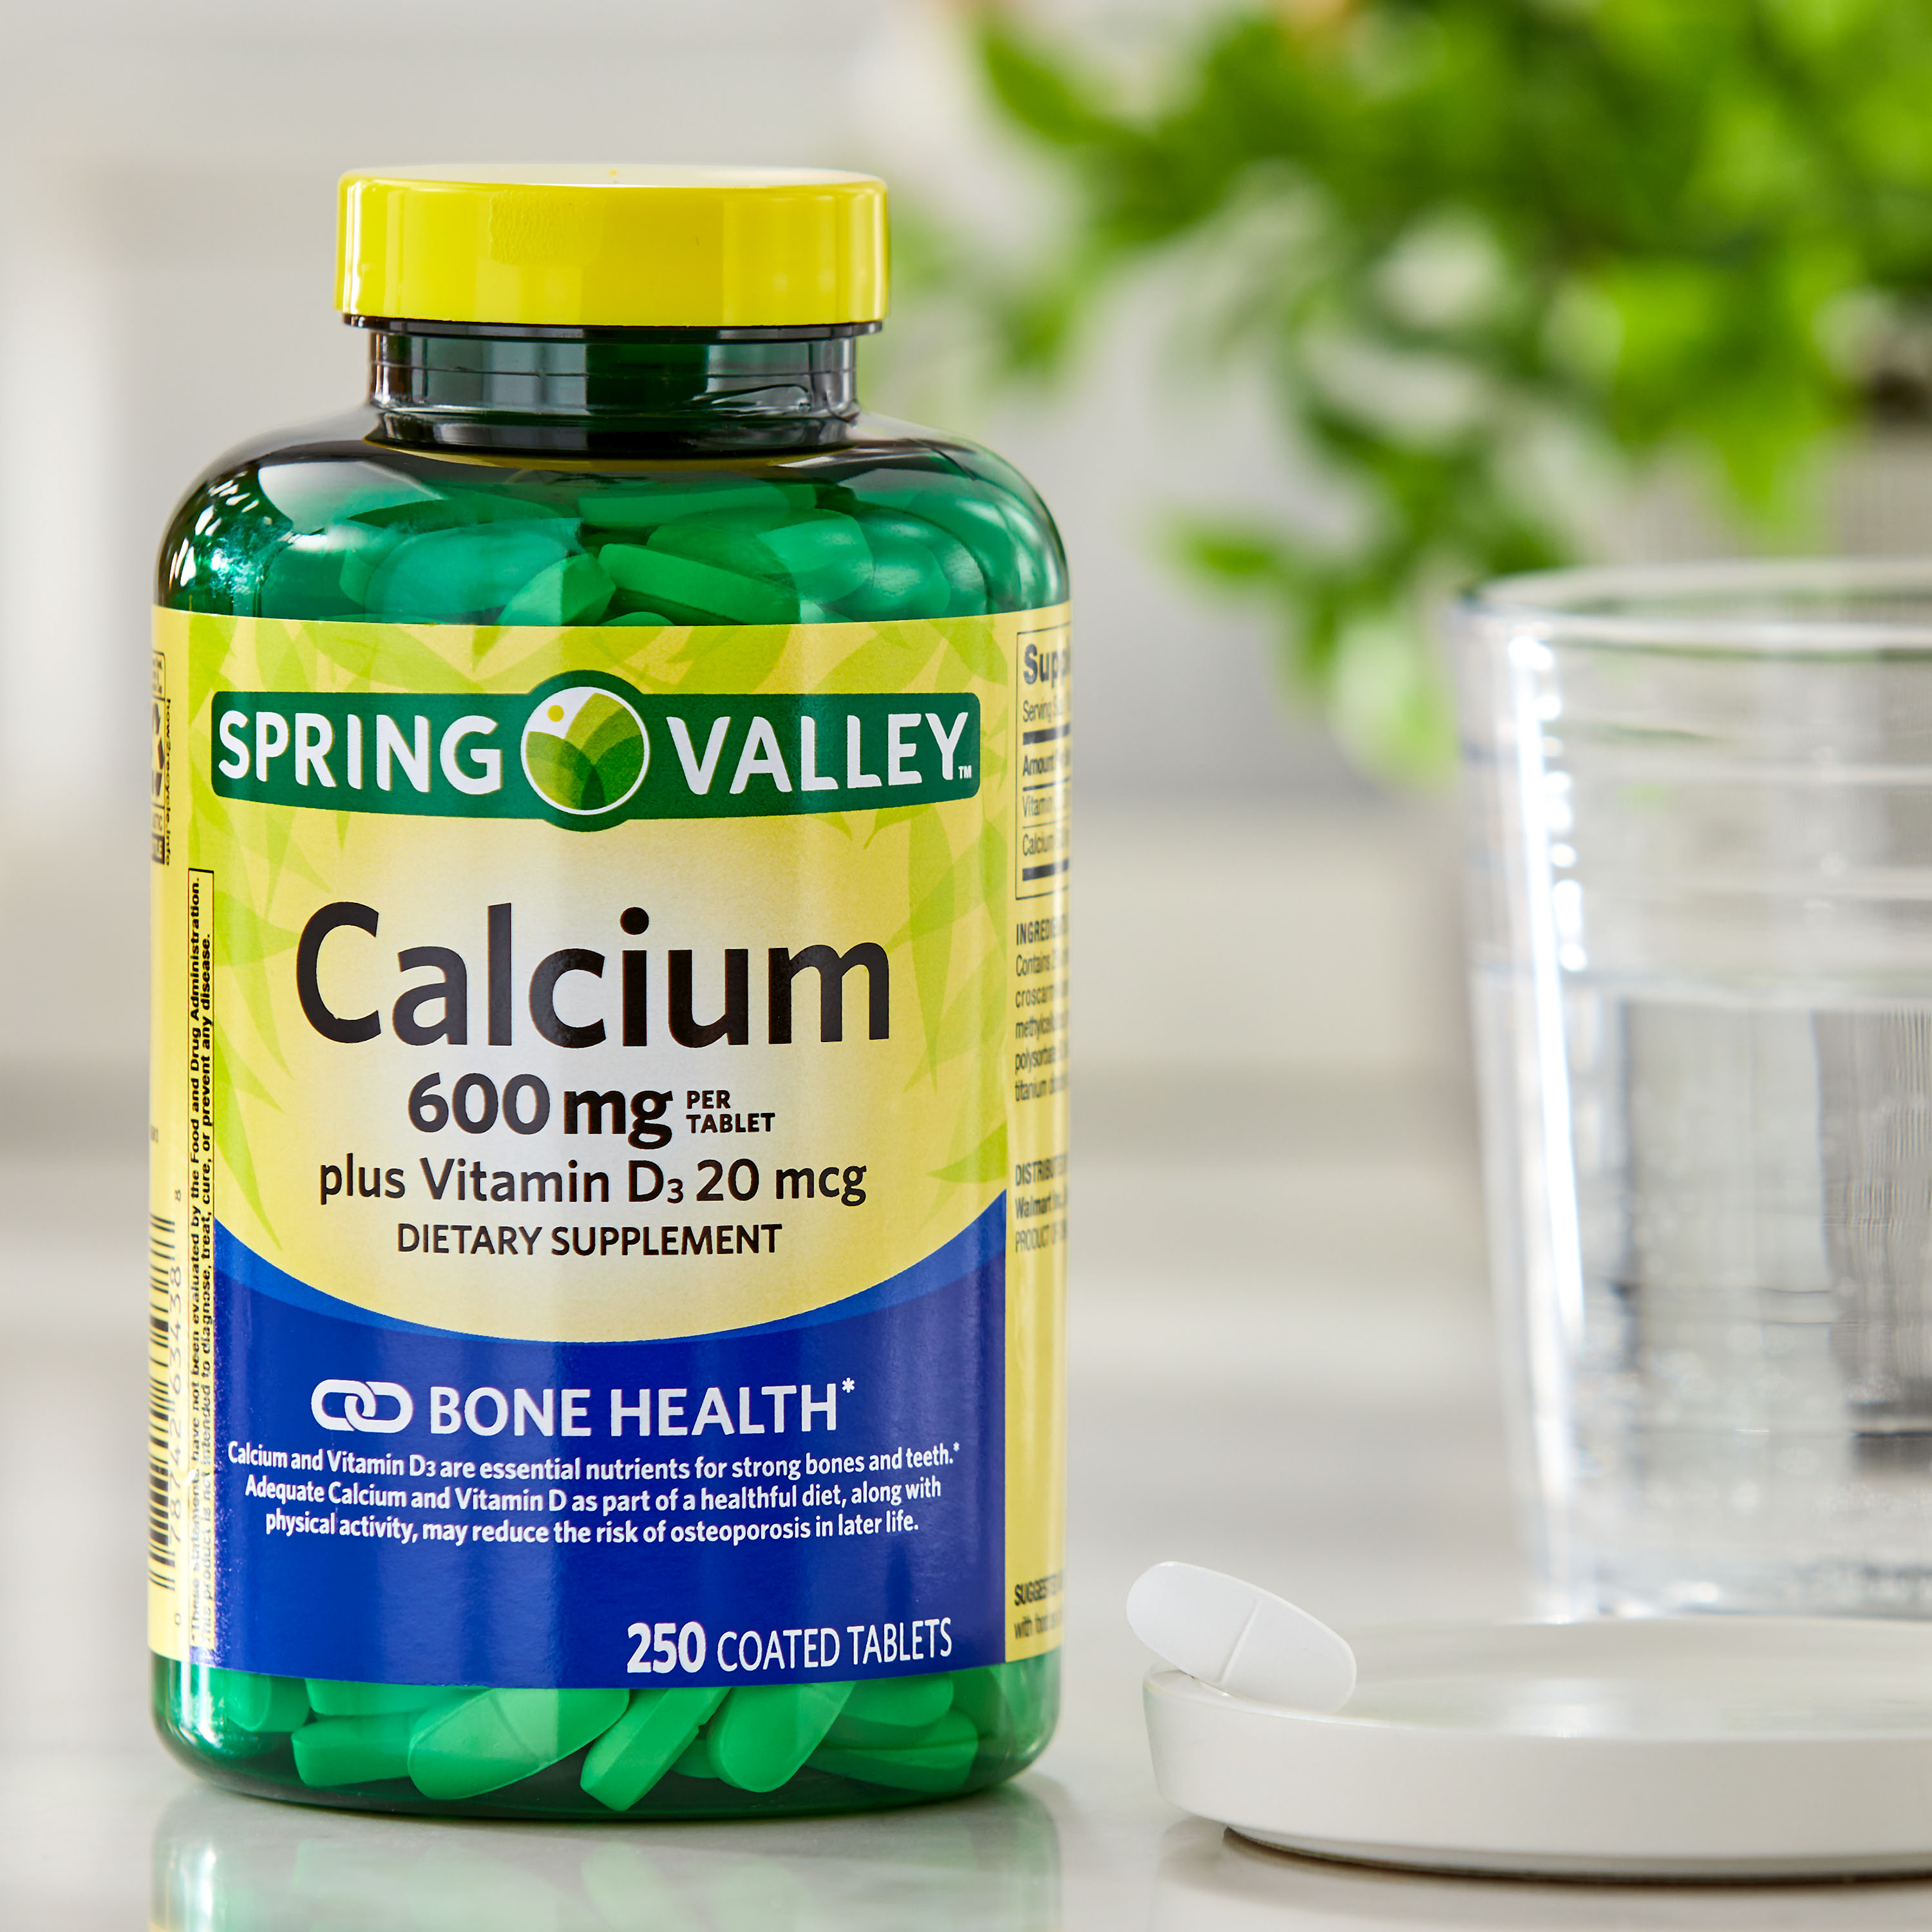 Spring Valley Calcium Plus Vitamin D Tablets Dietary Supplement, 600 mg, 250 Count - image 4 of 9